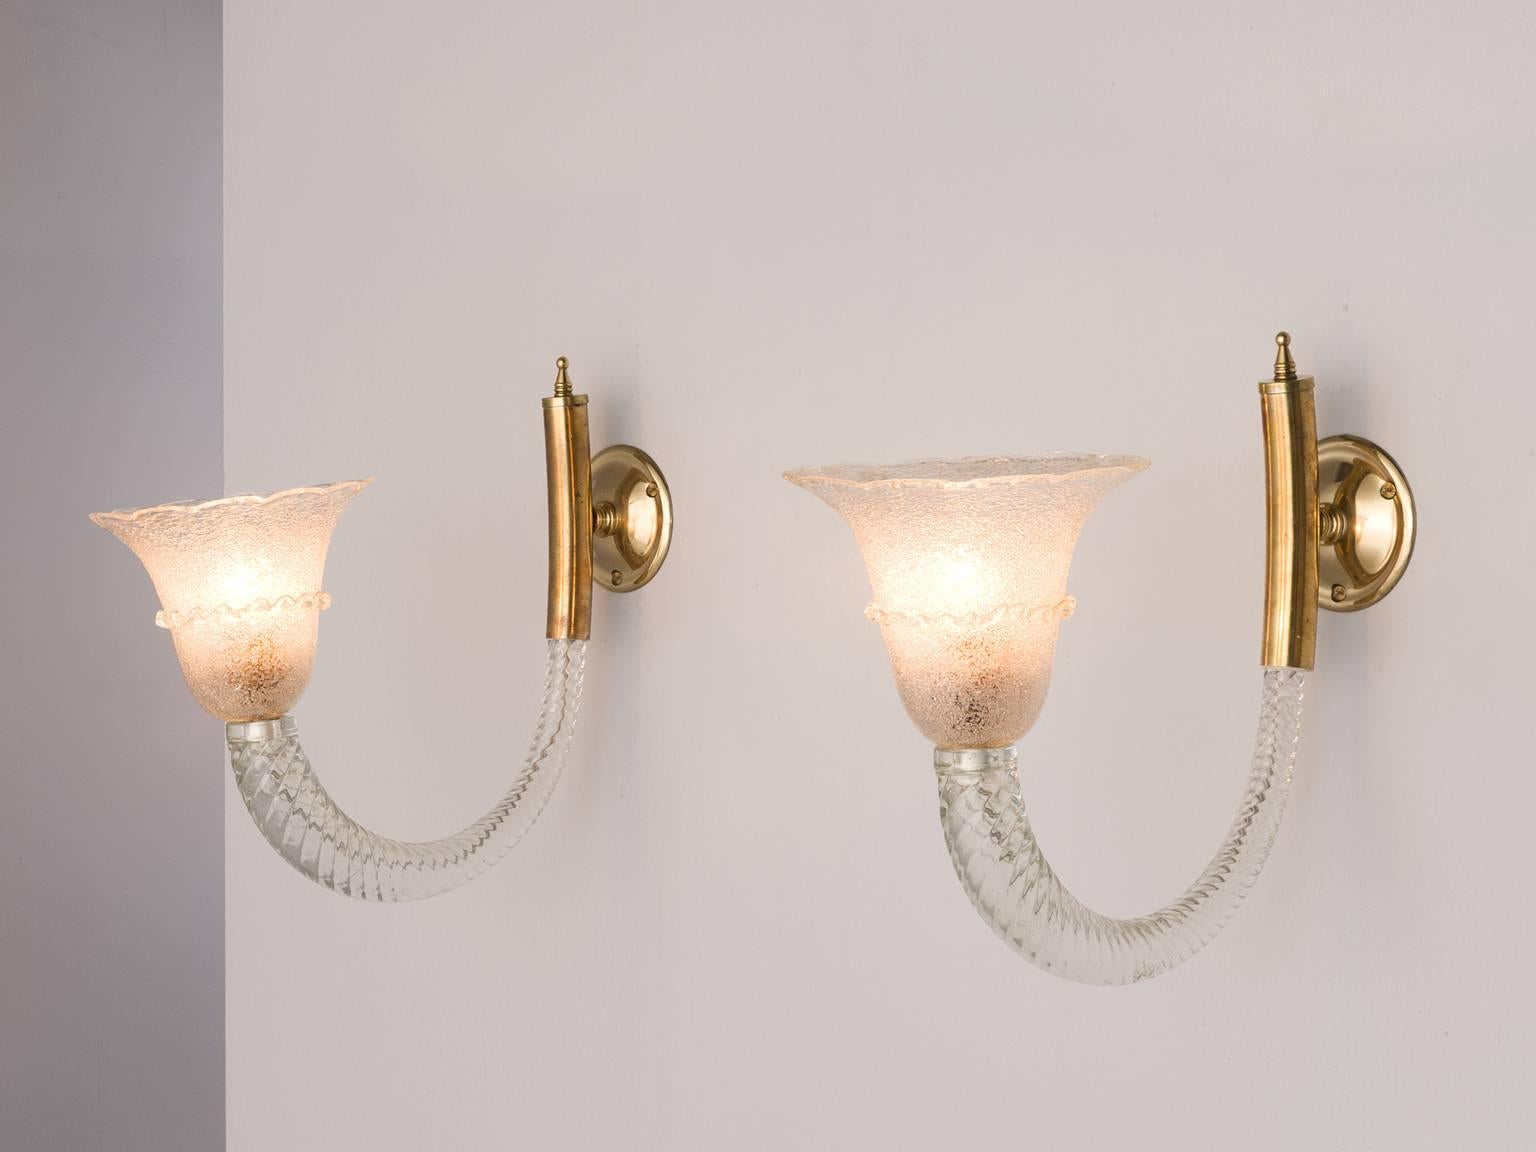 Pair of wall lights, in Murano glass and brass, for Barovier & Toso, Italy, 1940s.

Highly elegant pair of sconces by Ercole Barovier. These horn shaped wall lights have a royal and luxurious appearance. The horn of spiral clear glass is mounted